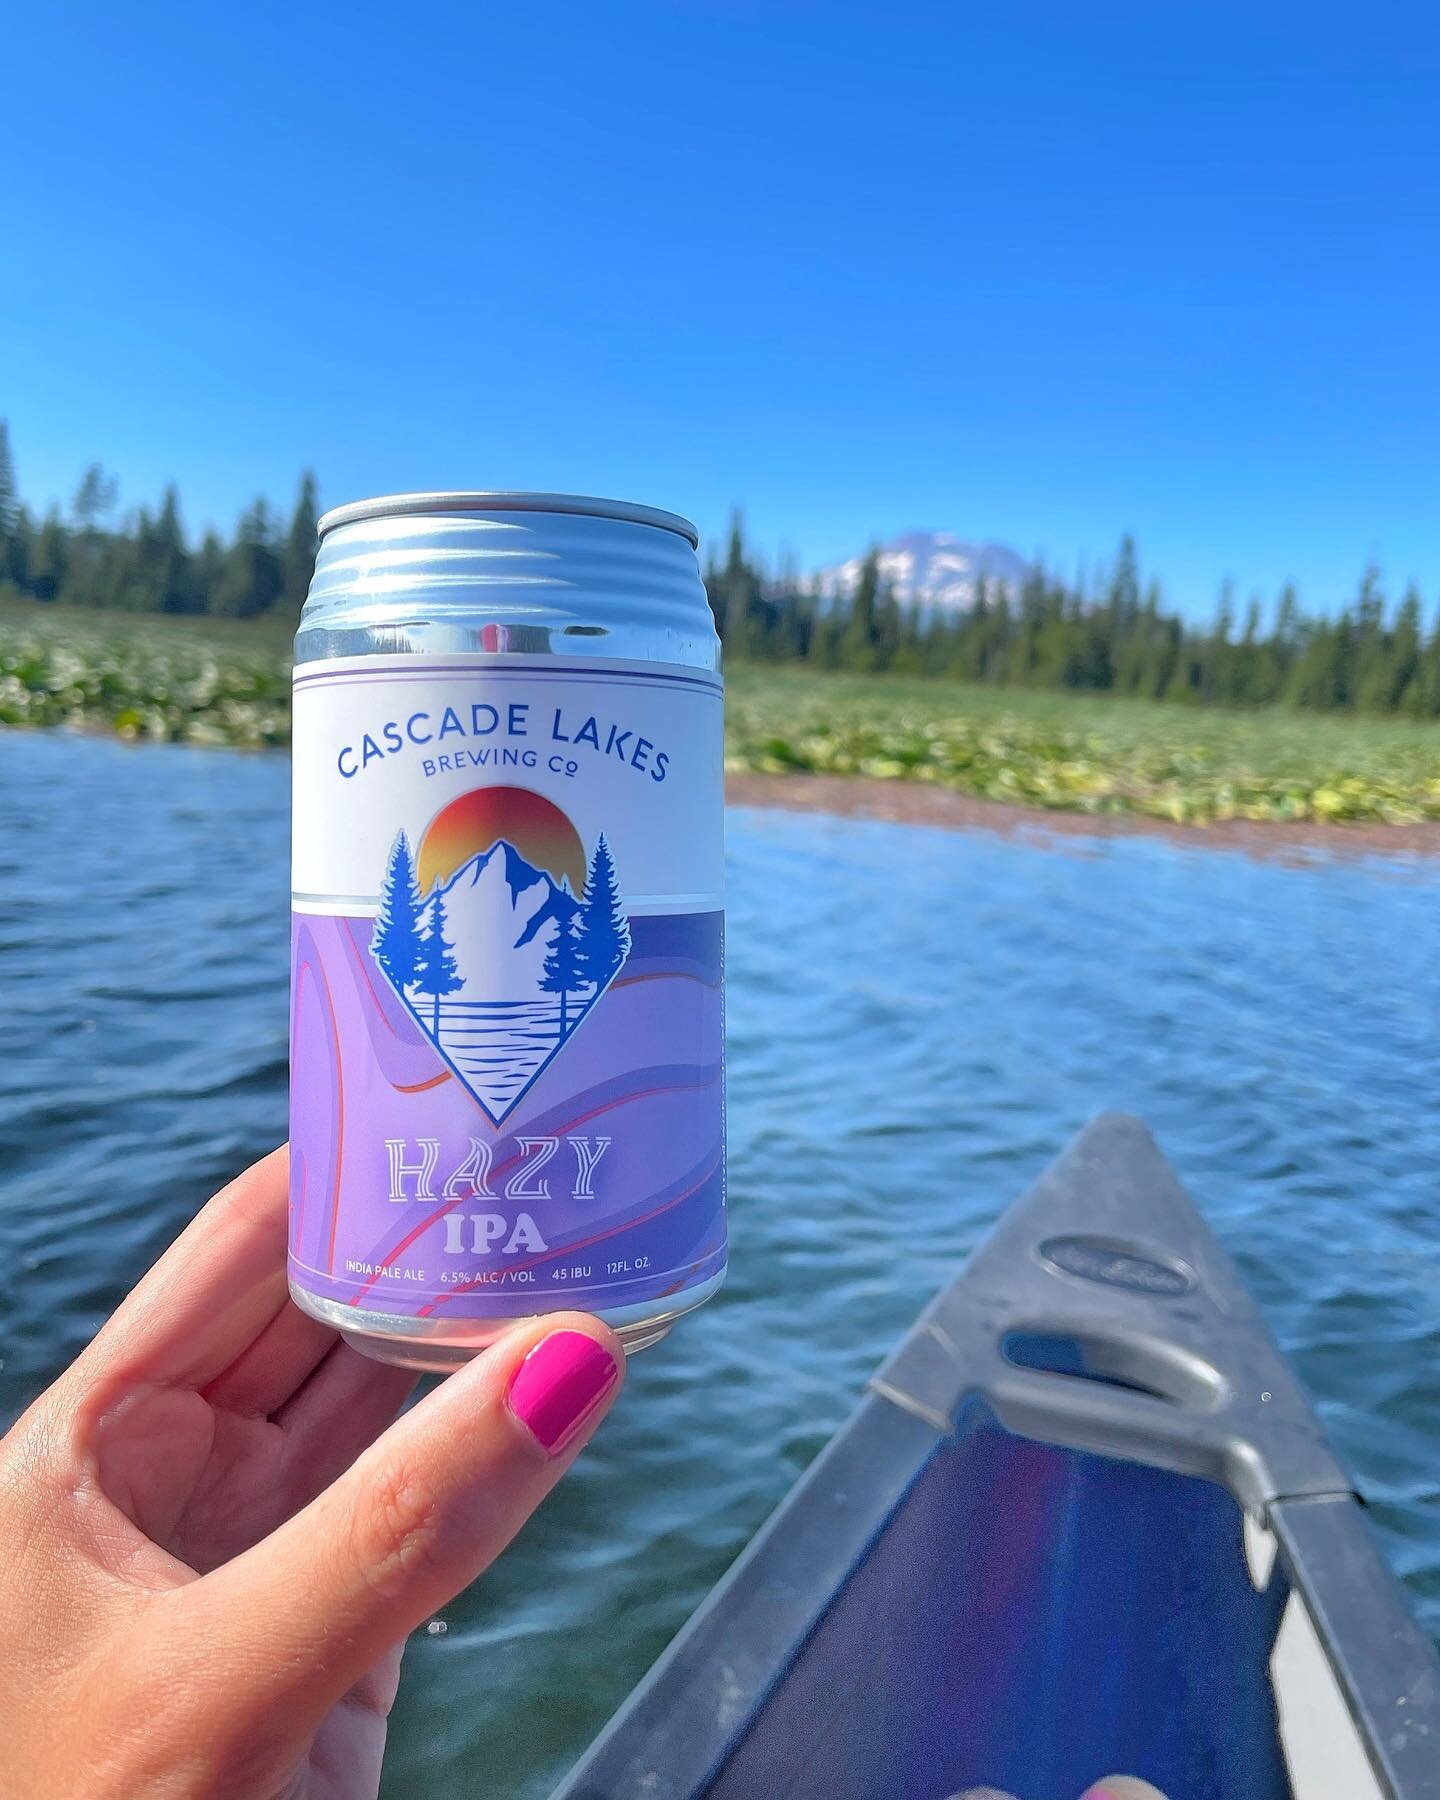 Canoe &amp; brew&mdash;name a better pair! 🛶  I did a super fun canoe trip with @wanderlusttours from Bend with views of the Three Sisters from the water 🌋 We of course drank Cascade Lakes Brewing on the Cascade Lakes to be extra proper 💁🏻&zwj;♀️